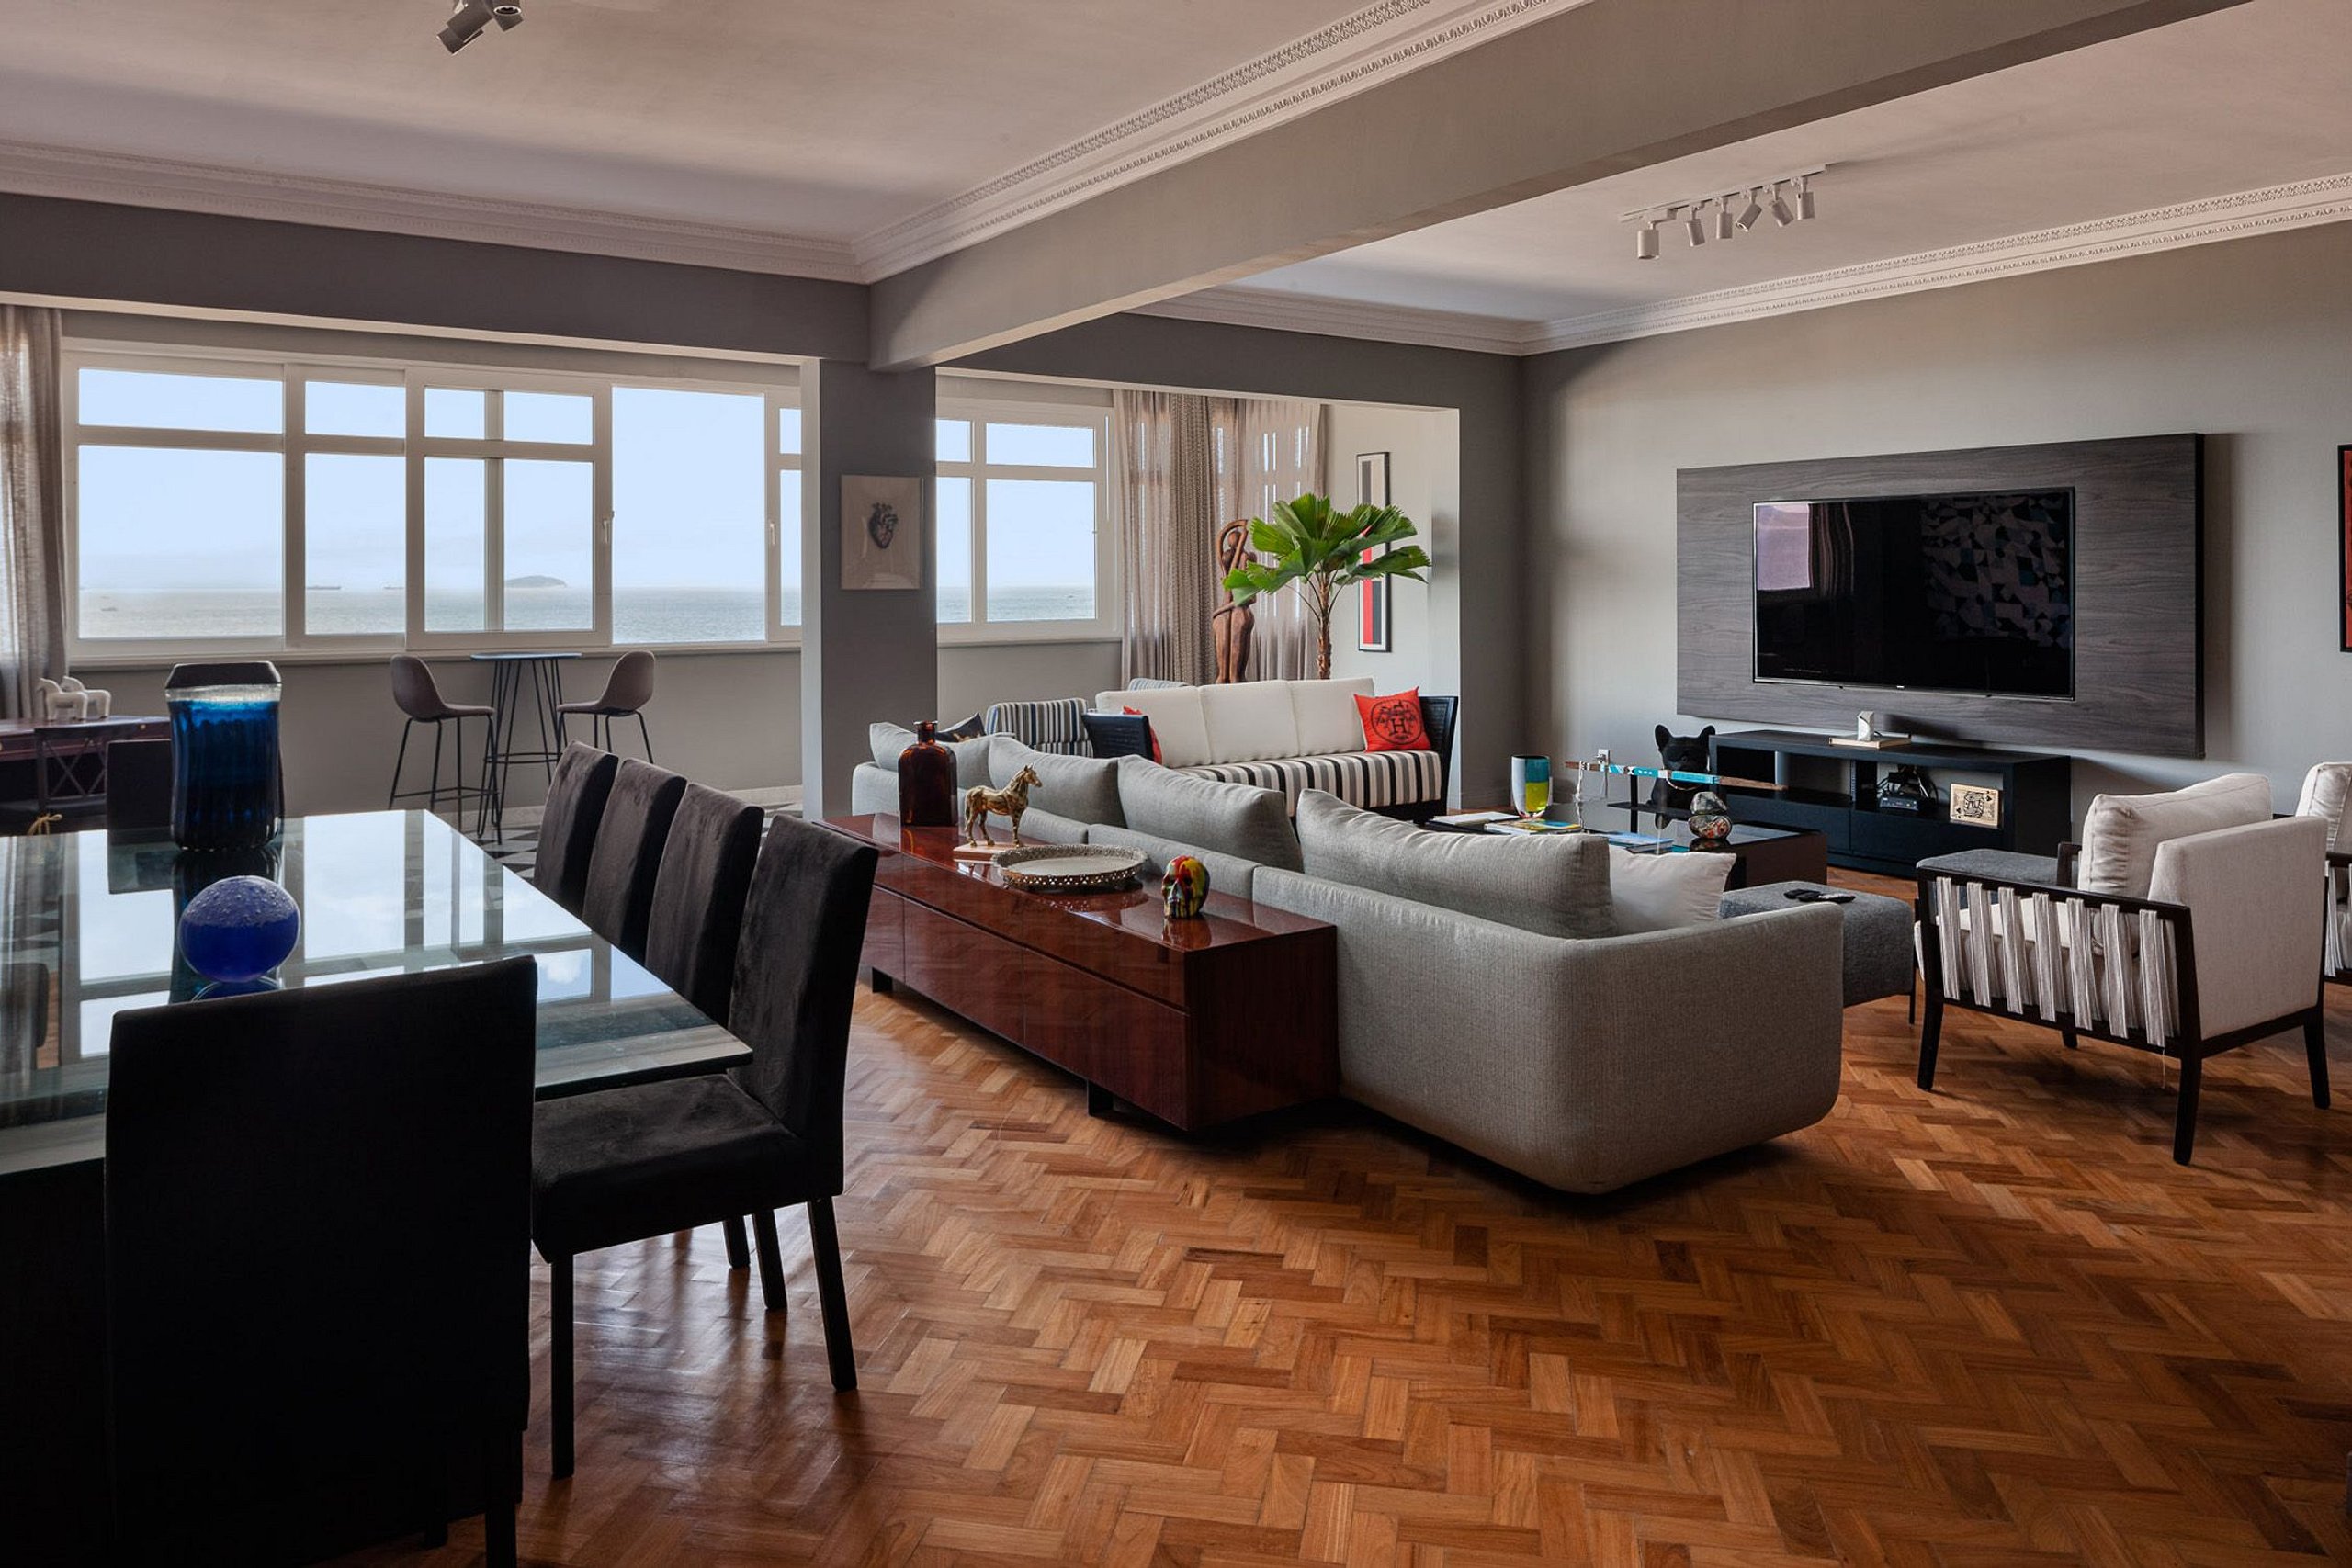 Property Image 1 - Contemporary Apartment with Mosaic Wood Floor